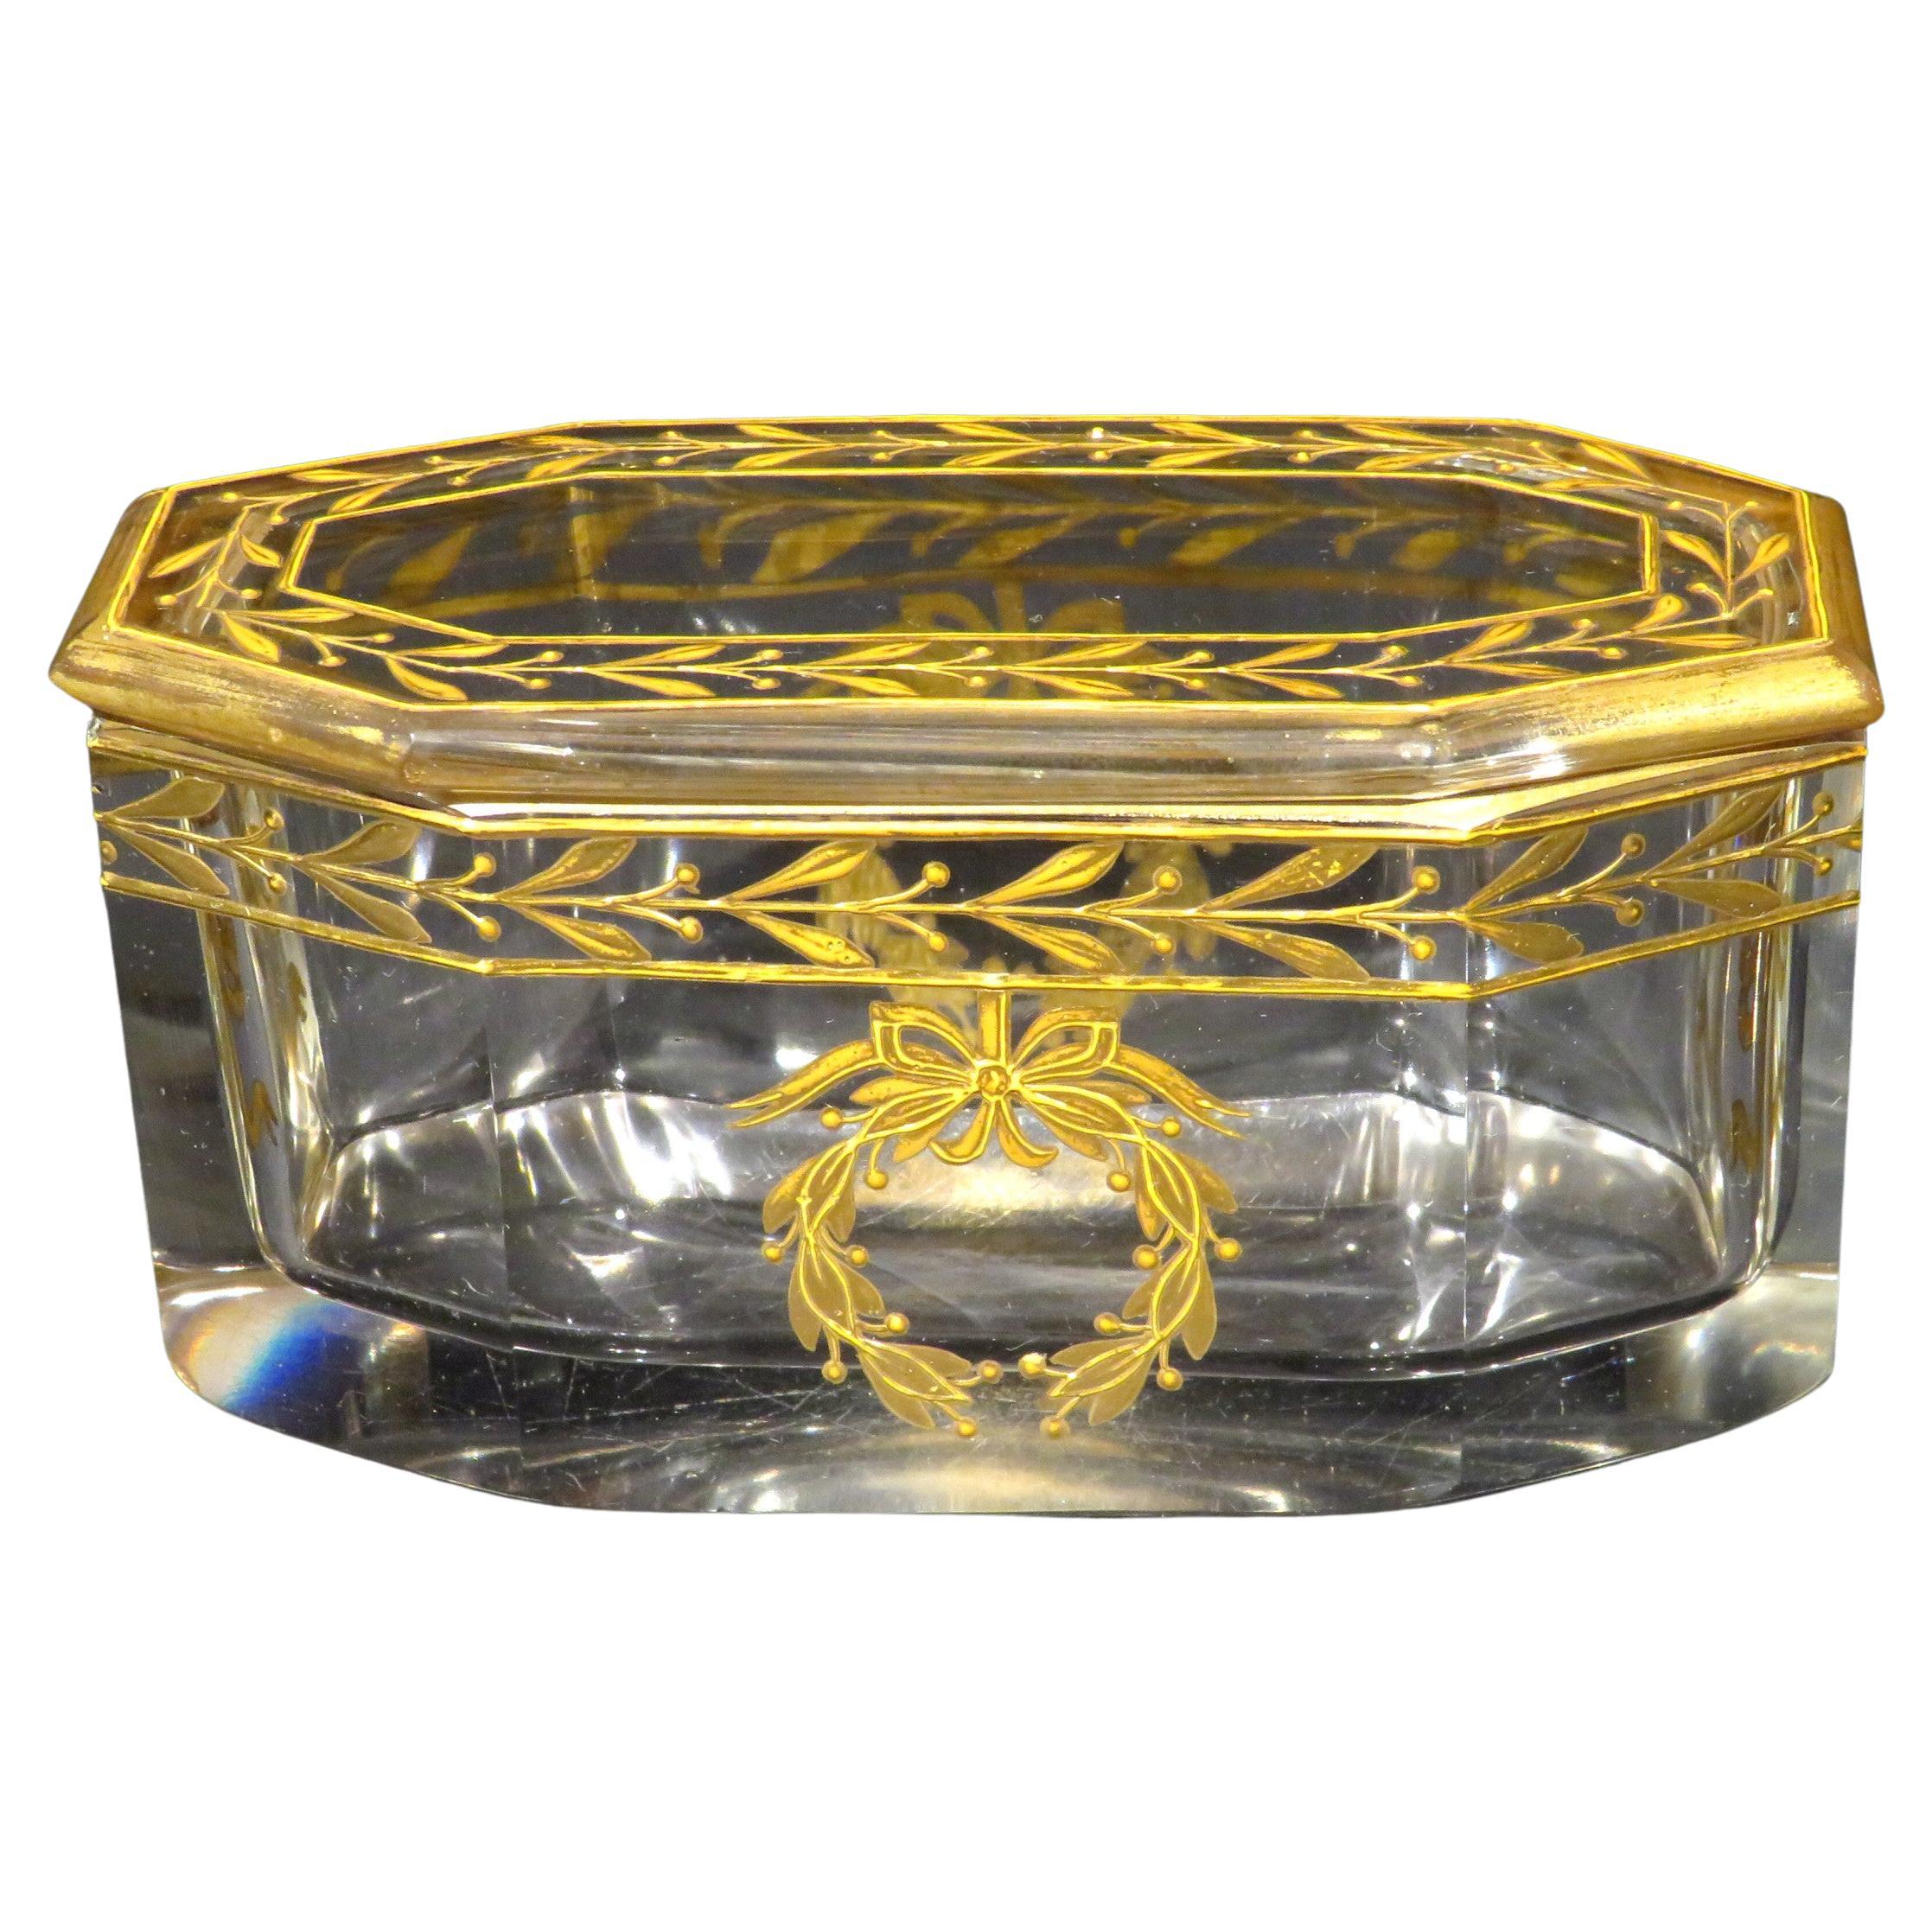 Fine Early 20th Century Gilt Decorated Glass Dresser Jar or Box, Circa 1920 For Sale